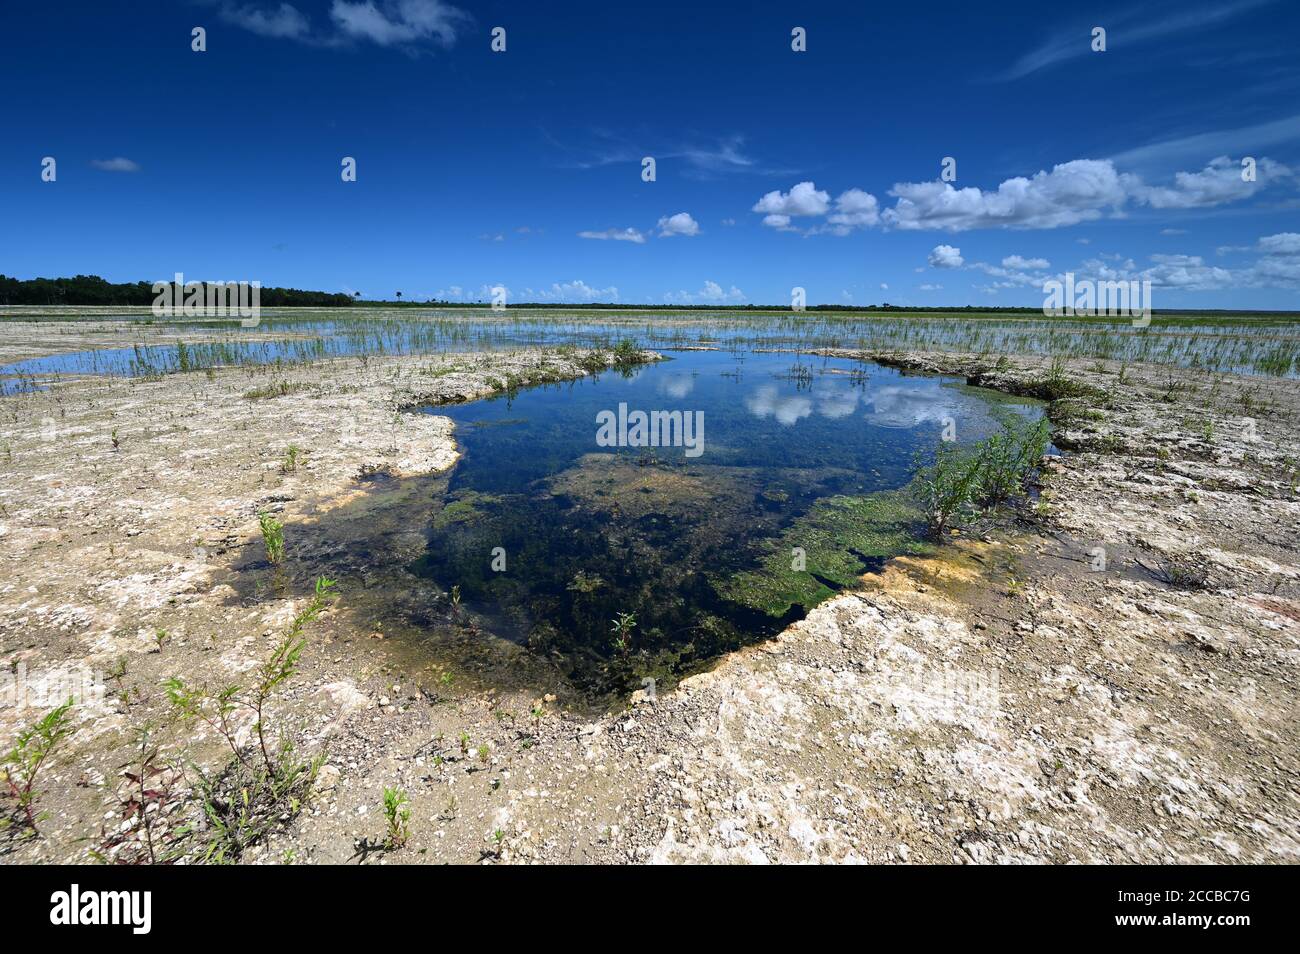 Summer clouds over Hole-in-the-Donut habitat restoration project in Everglades National Park, Florida. Stock Photo